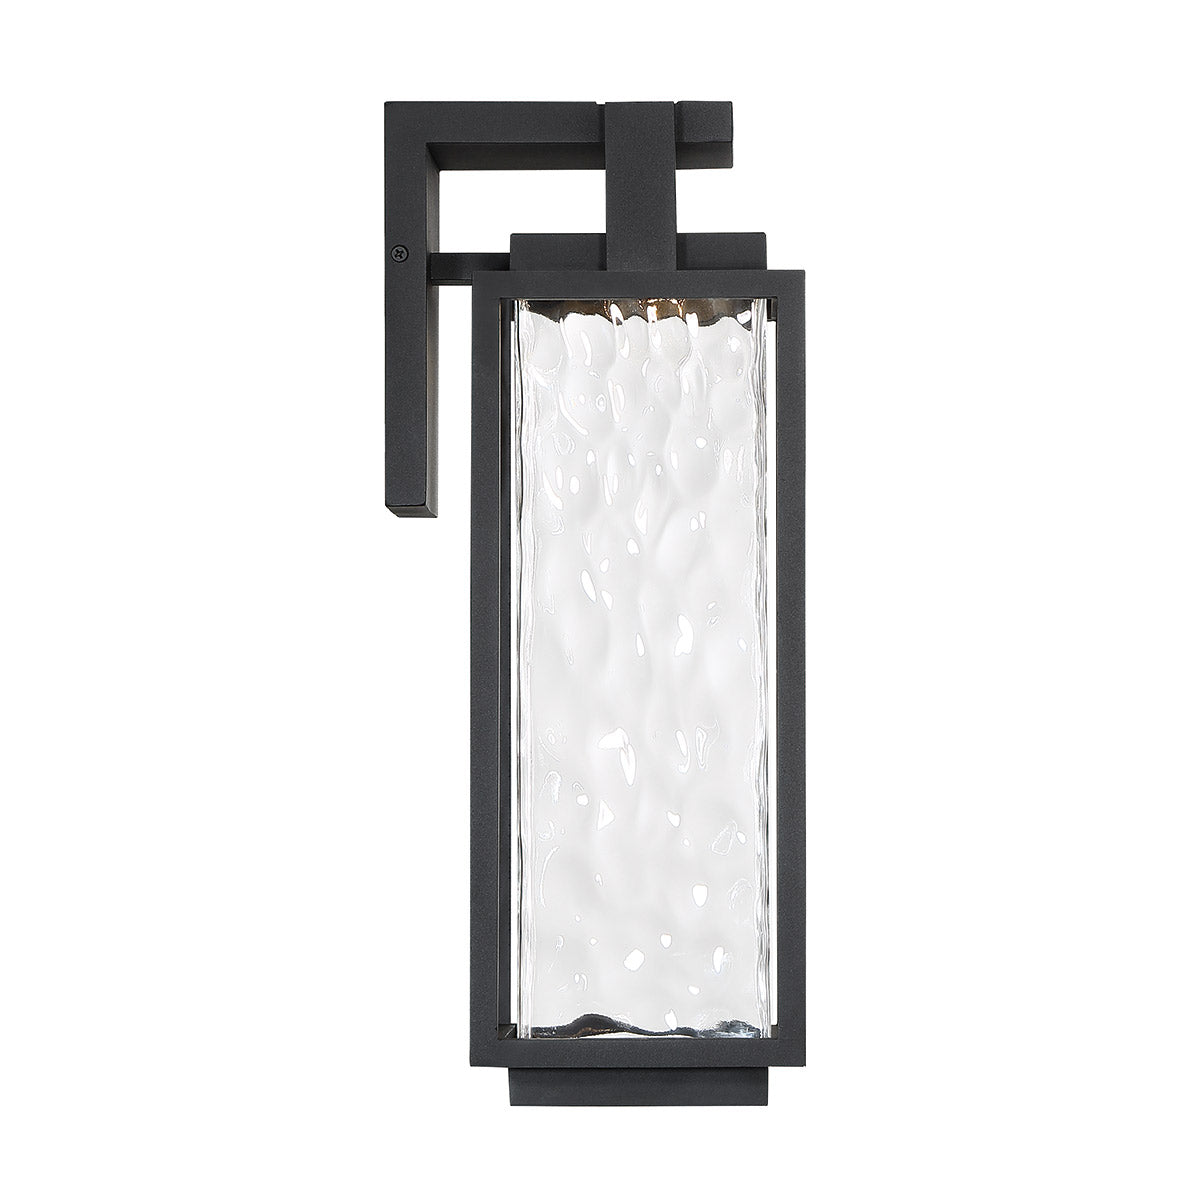 Two if By Sea 18" Indoor/Outdoor Wall Light